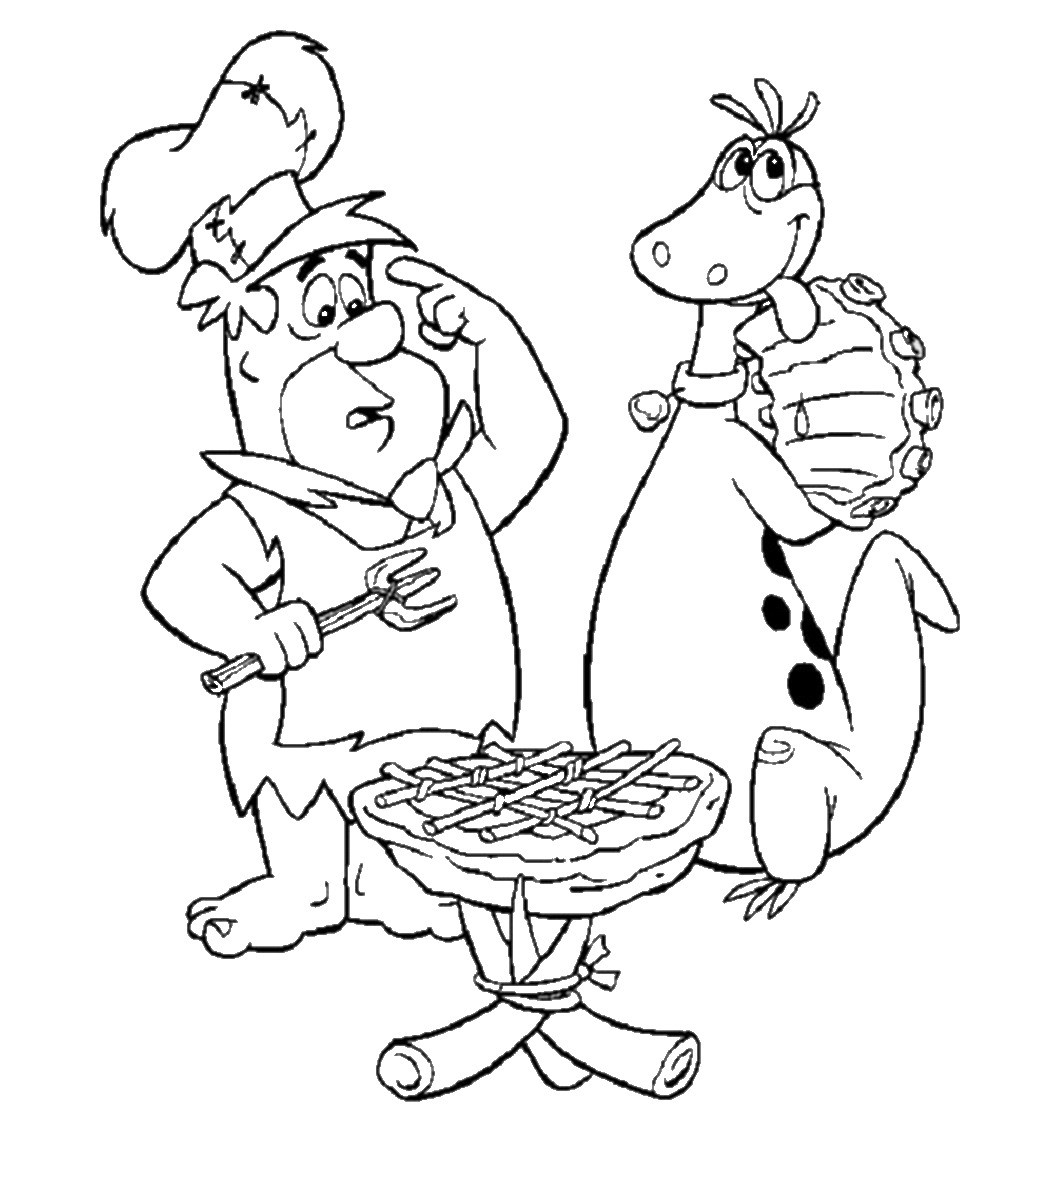 Coloring Sheets Free Printable
 The Flintstones Coloring Pages